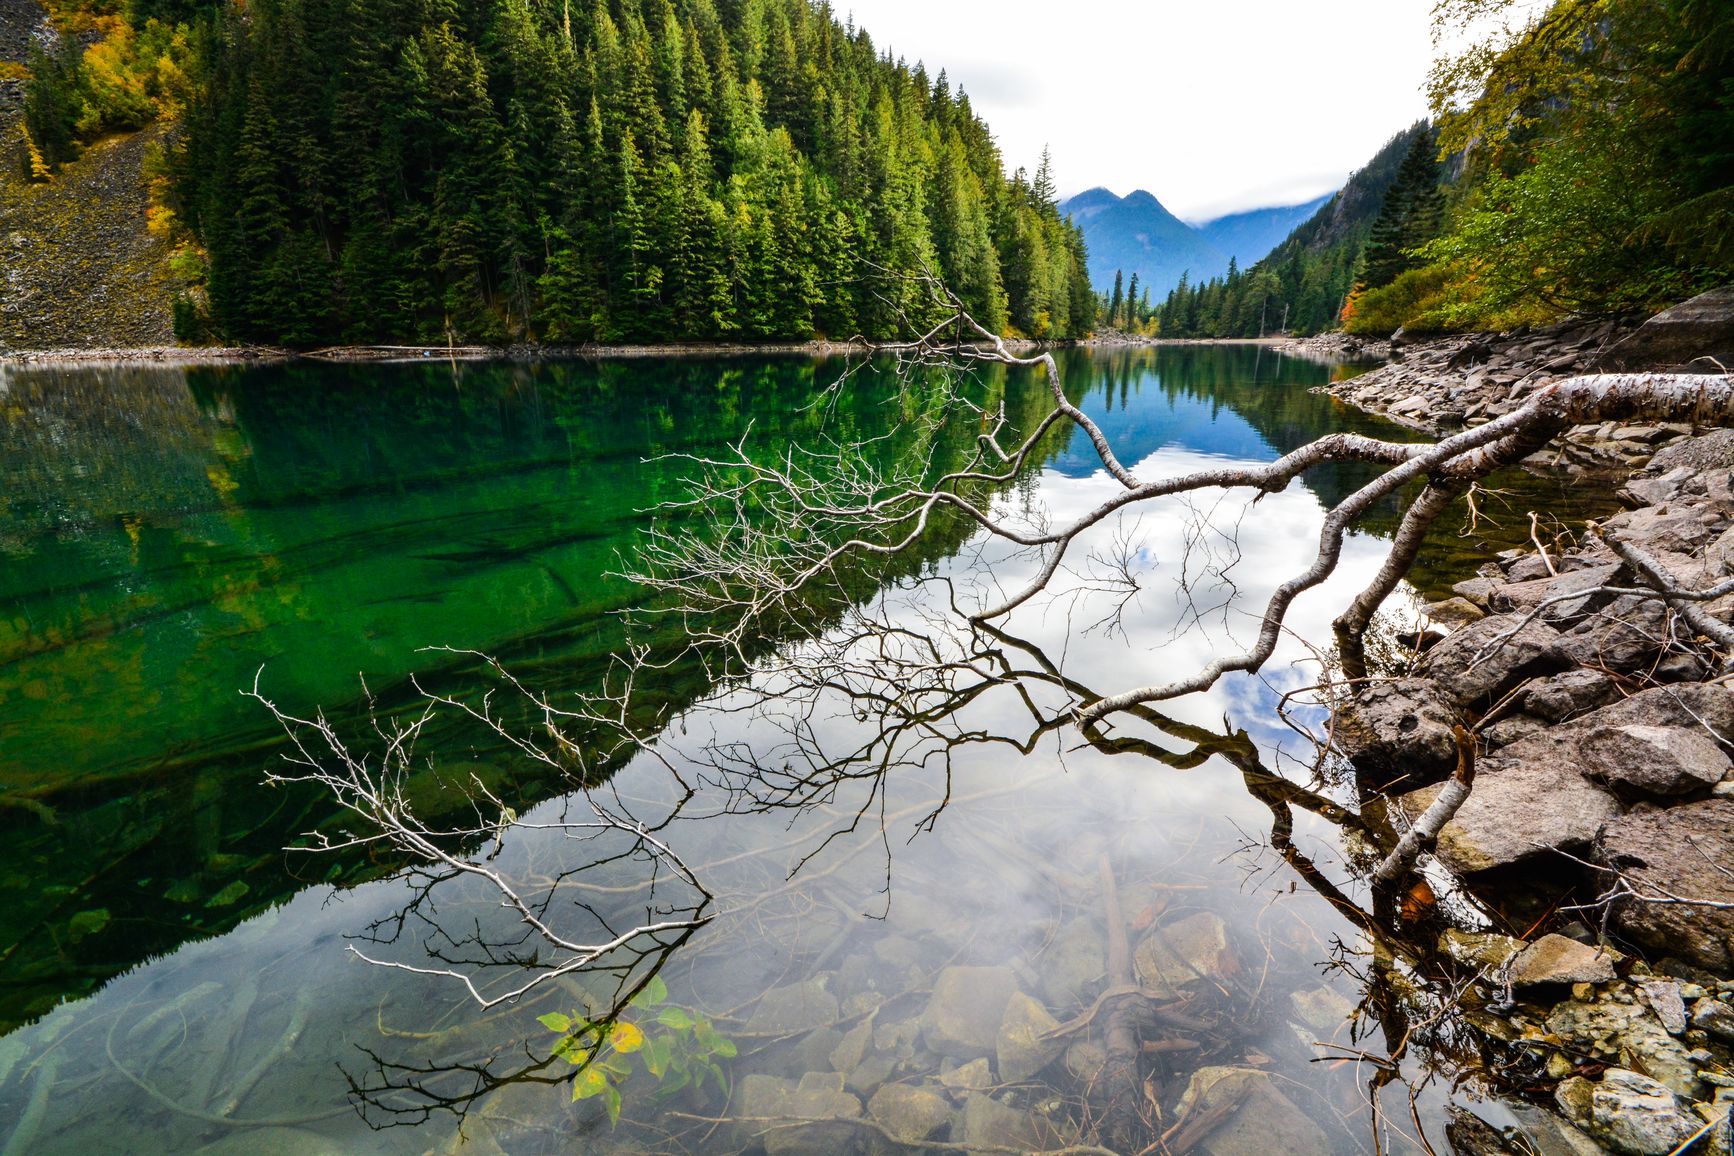 Deadfall lines the rocky shore of Lindeman Lake, while clear emerald water reveals submerged logs on the bottom of the lake in Sx̱ótsaqel/Chilliwack Lake Park.